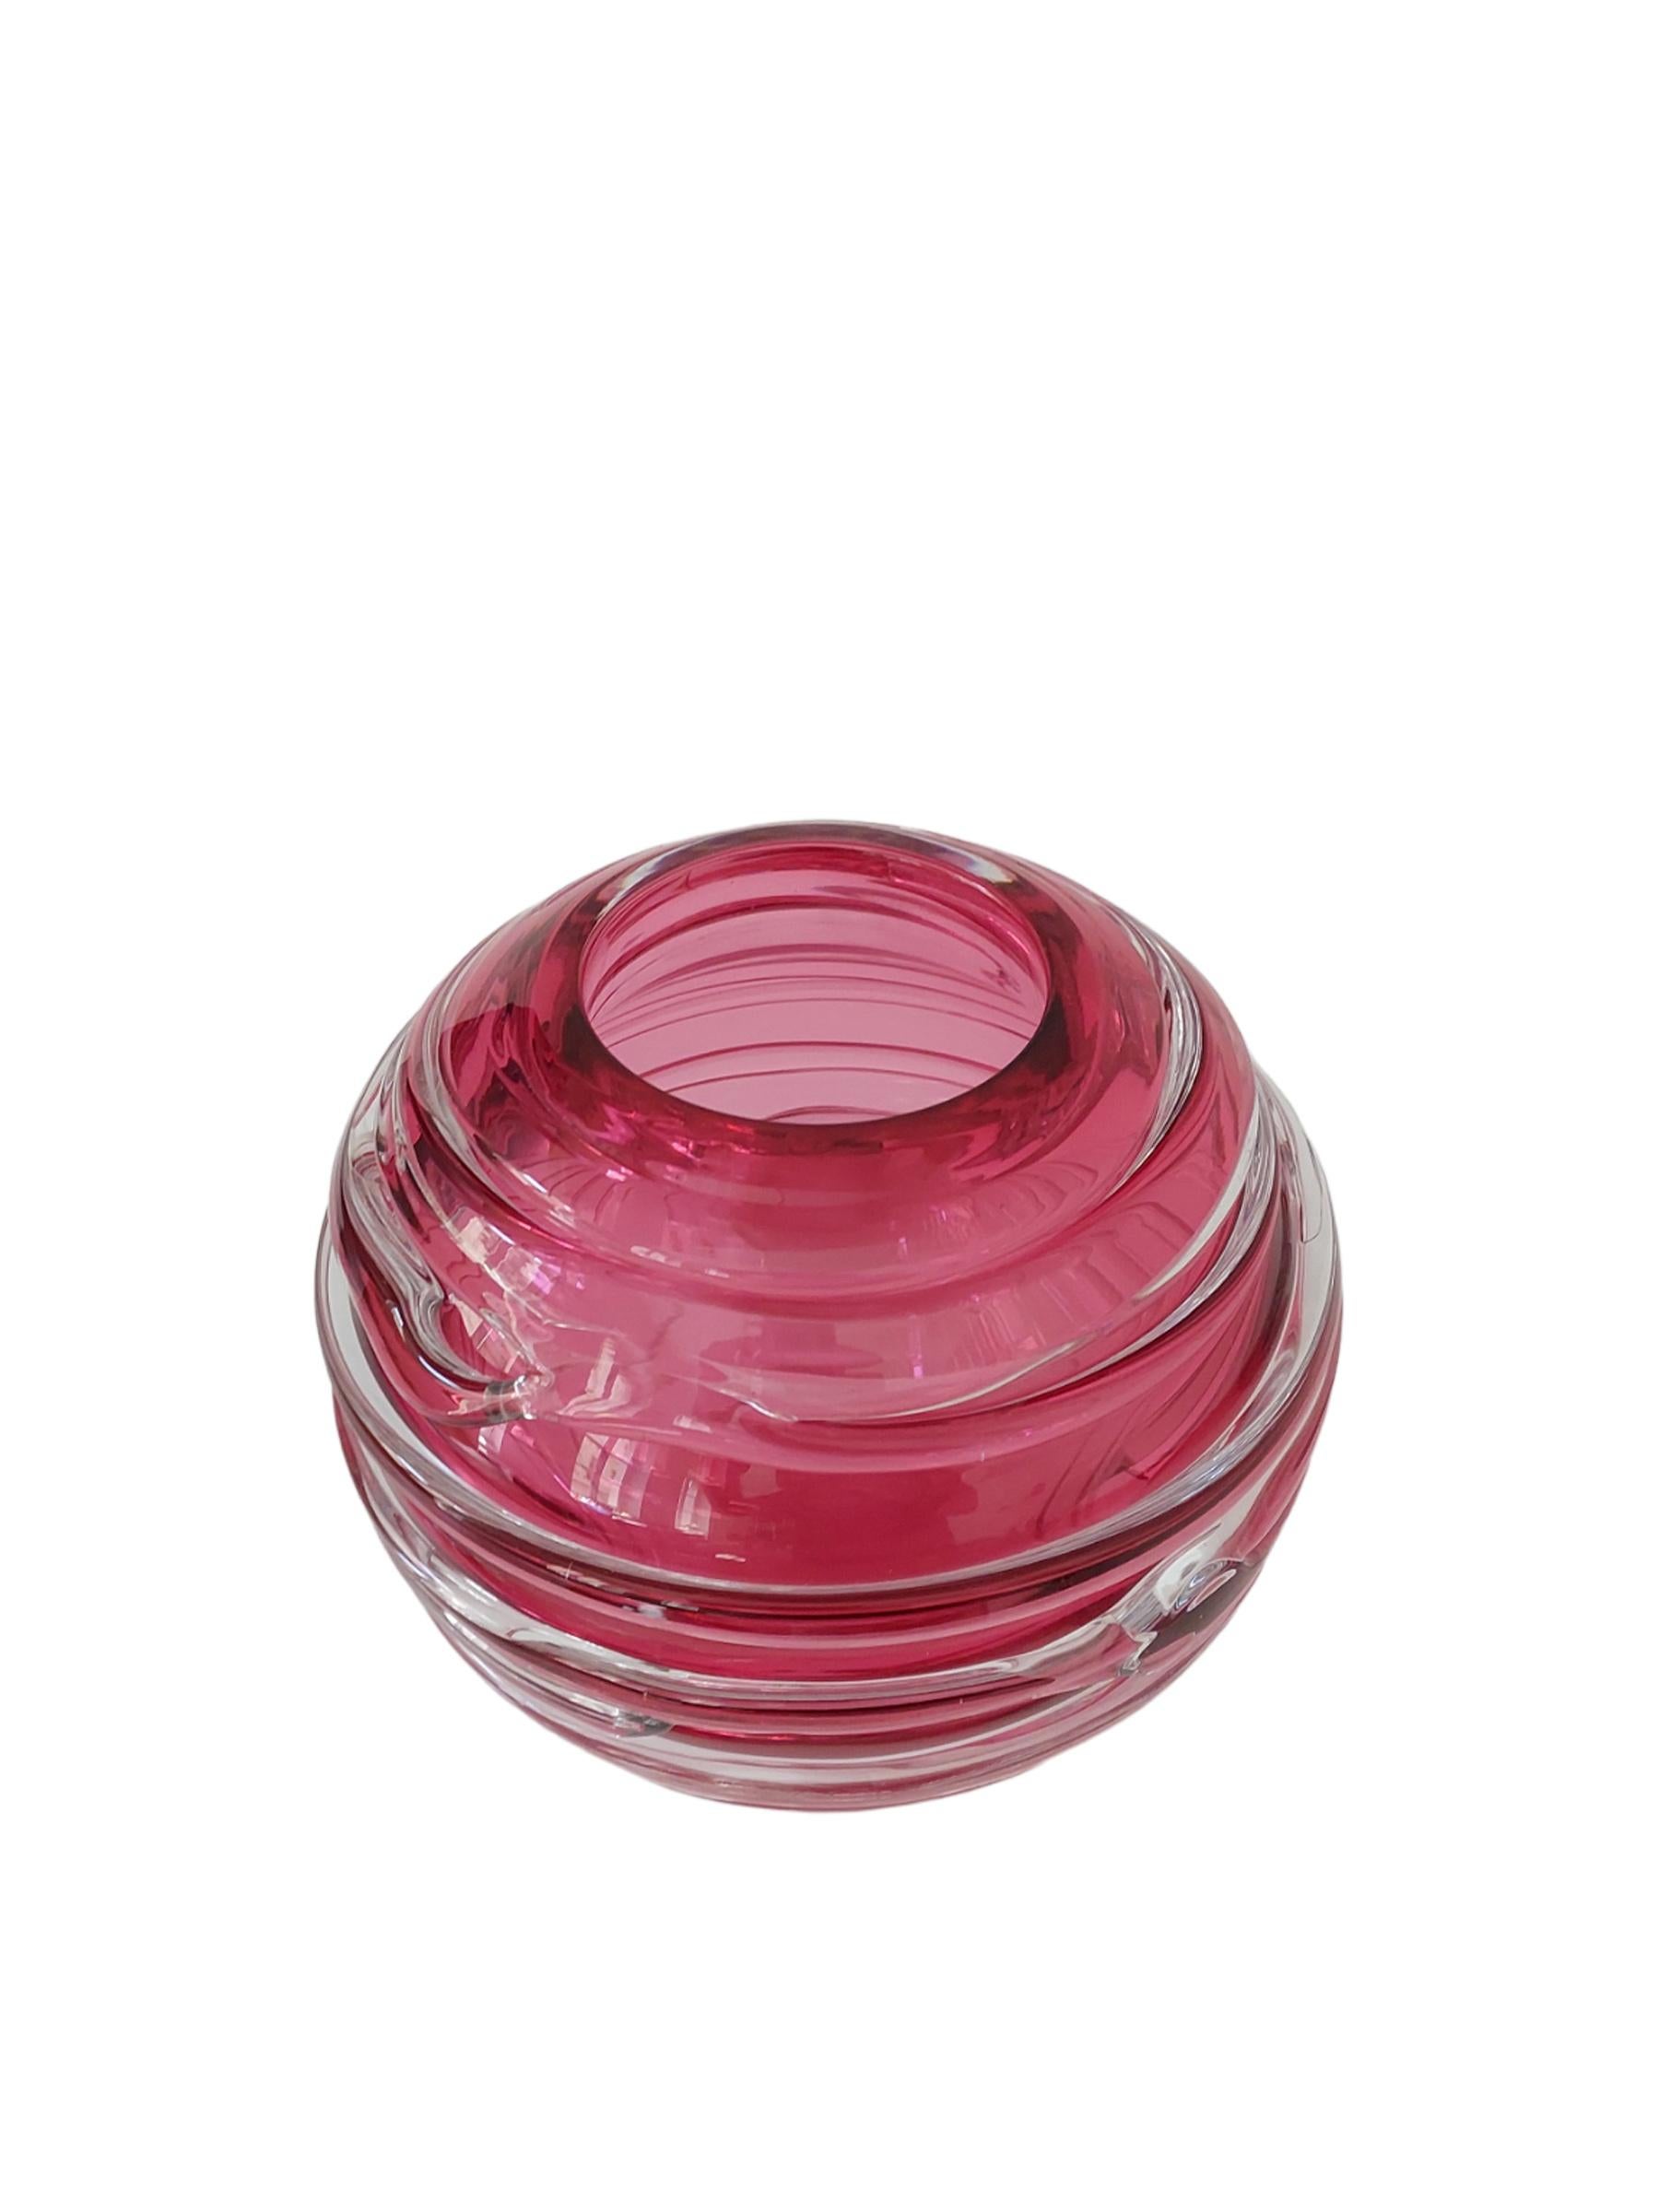 Mouth blown glass vase completely hand-crafted. Pink color with ribbed details.
16 cm / 6 1/4' diameter perfect size for everyday flowers and even beautiful when empty as a sculpture that will enhance the exquisite design detail.
Mouth opening 9 cm/